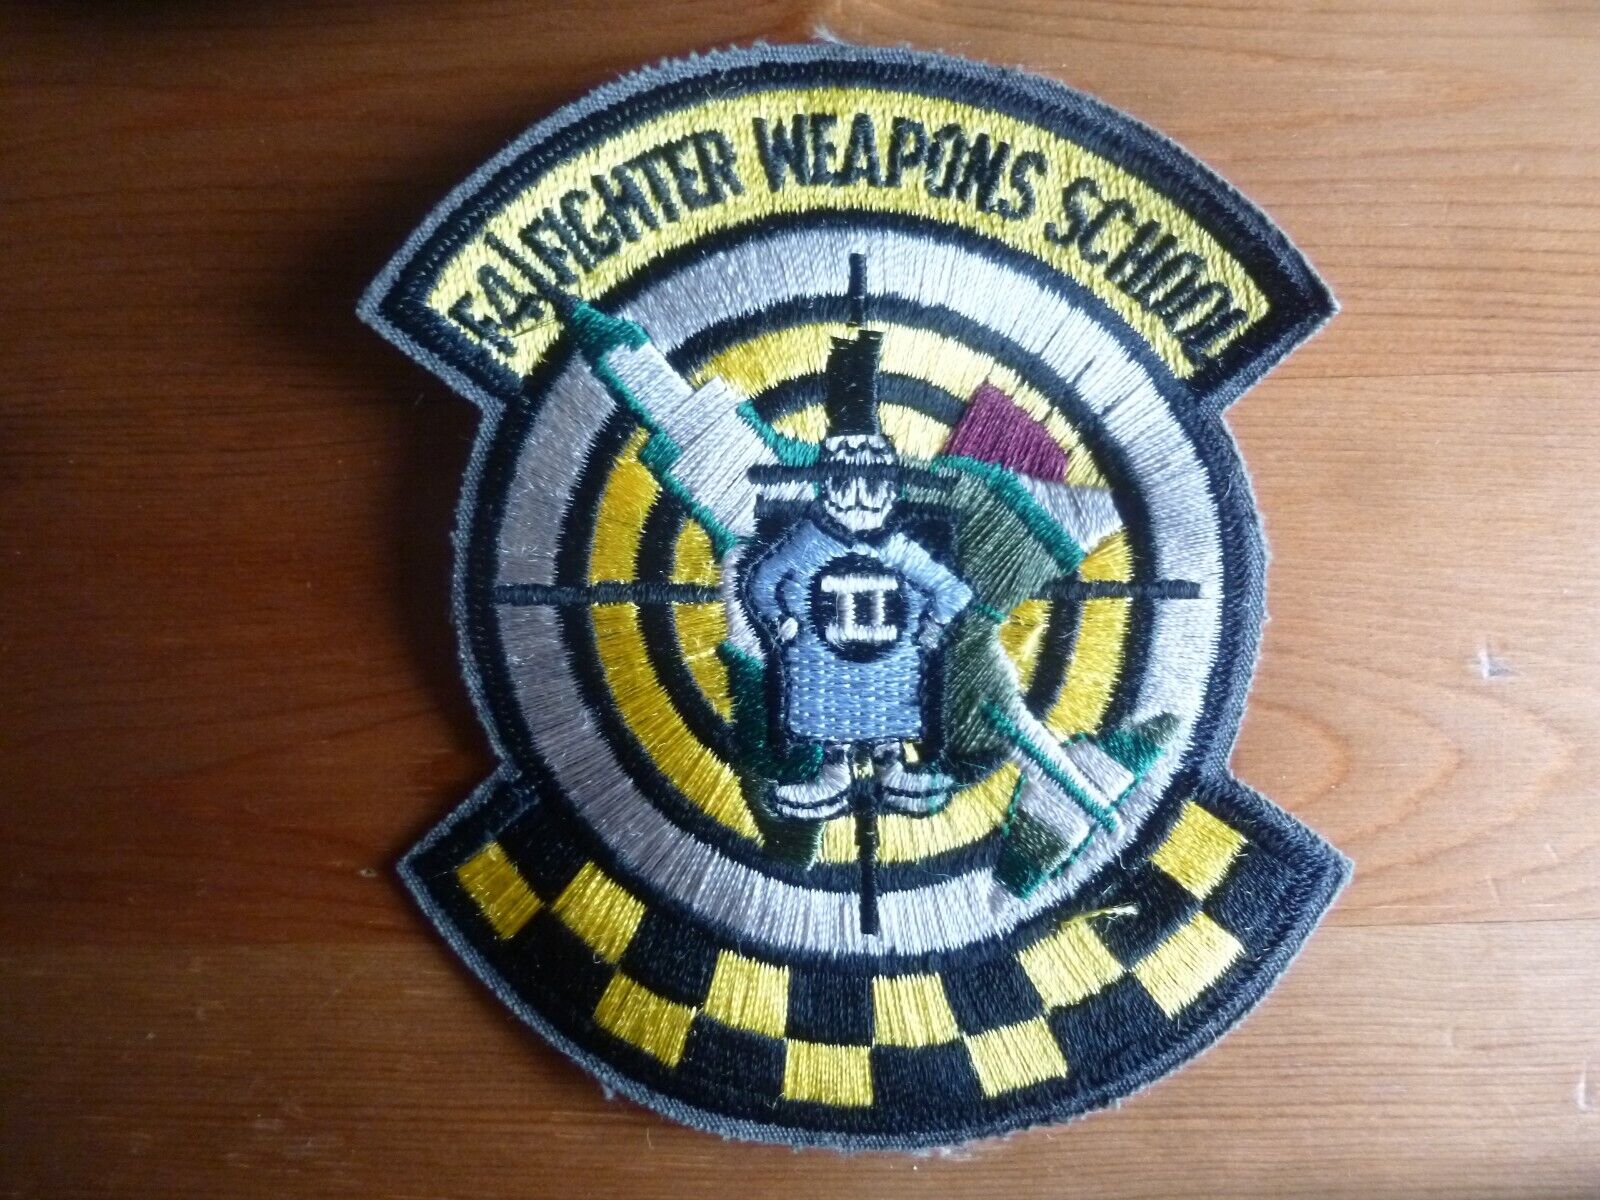 USAF F-4 Phantom WEAPONS SCHOOL Patch US Air Force Tactical Fighter Squadron